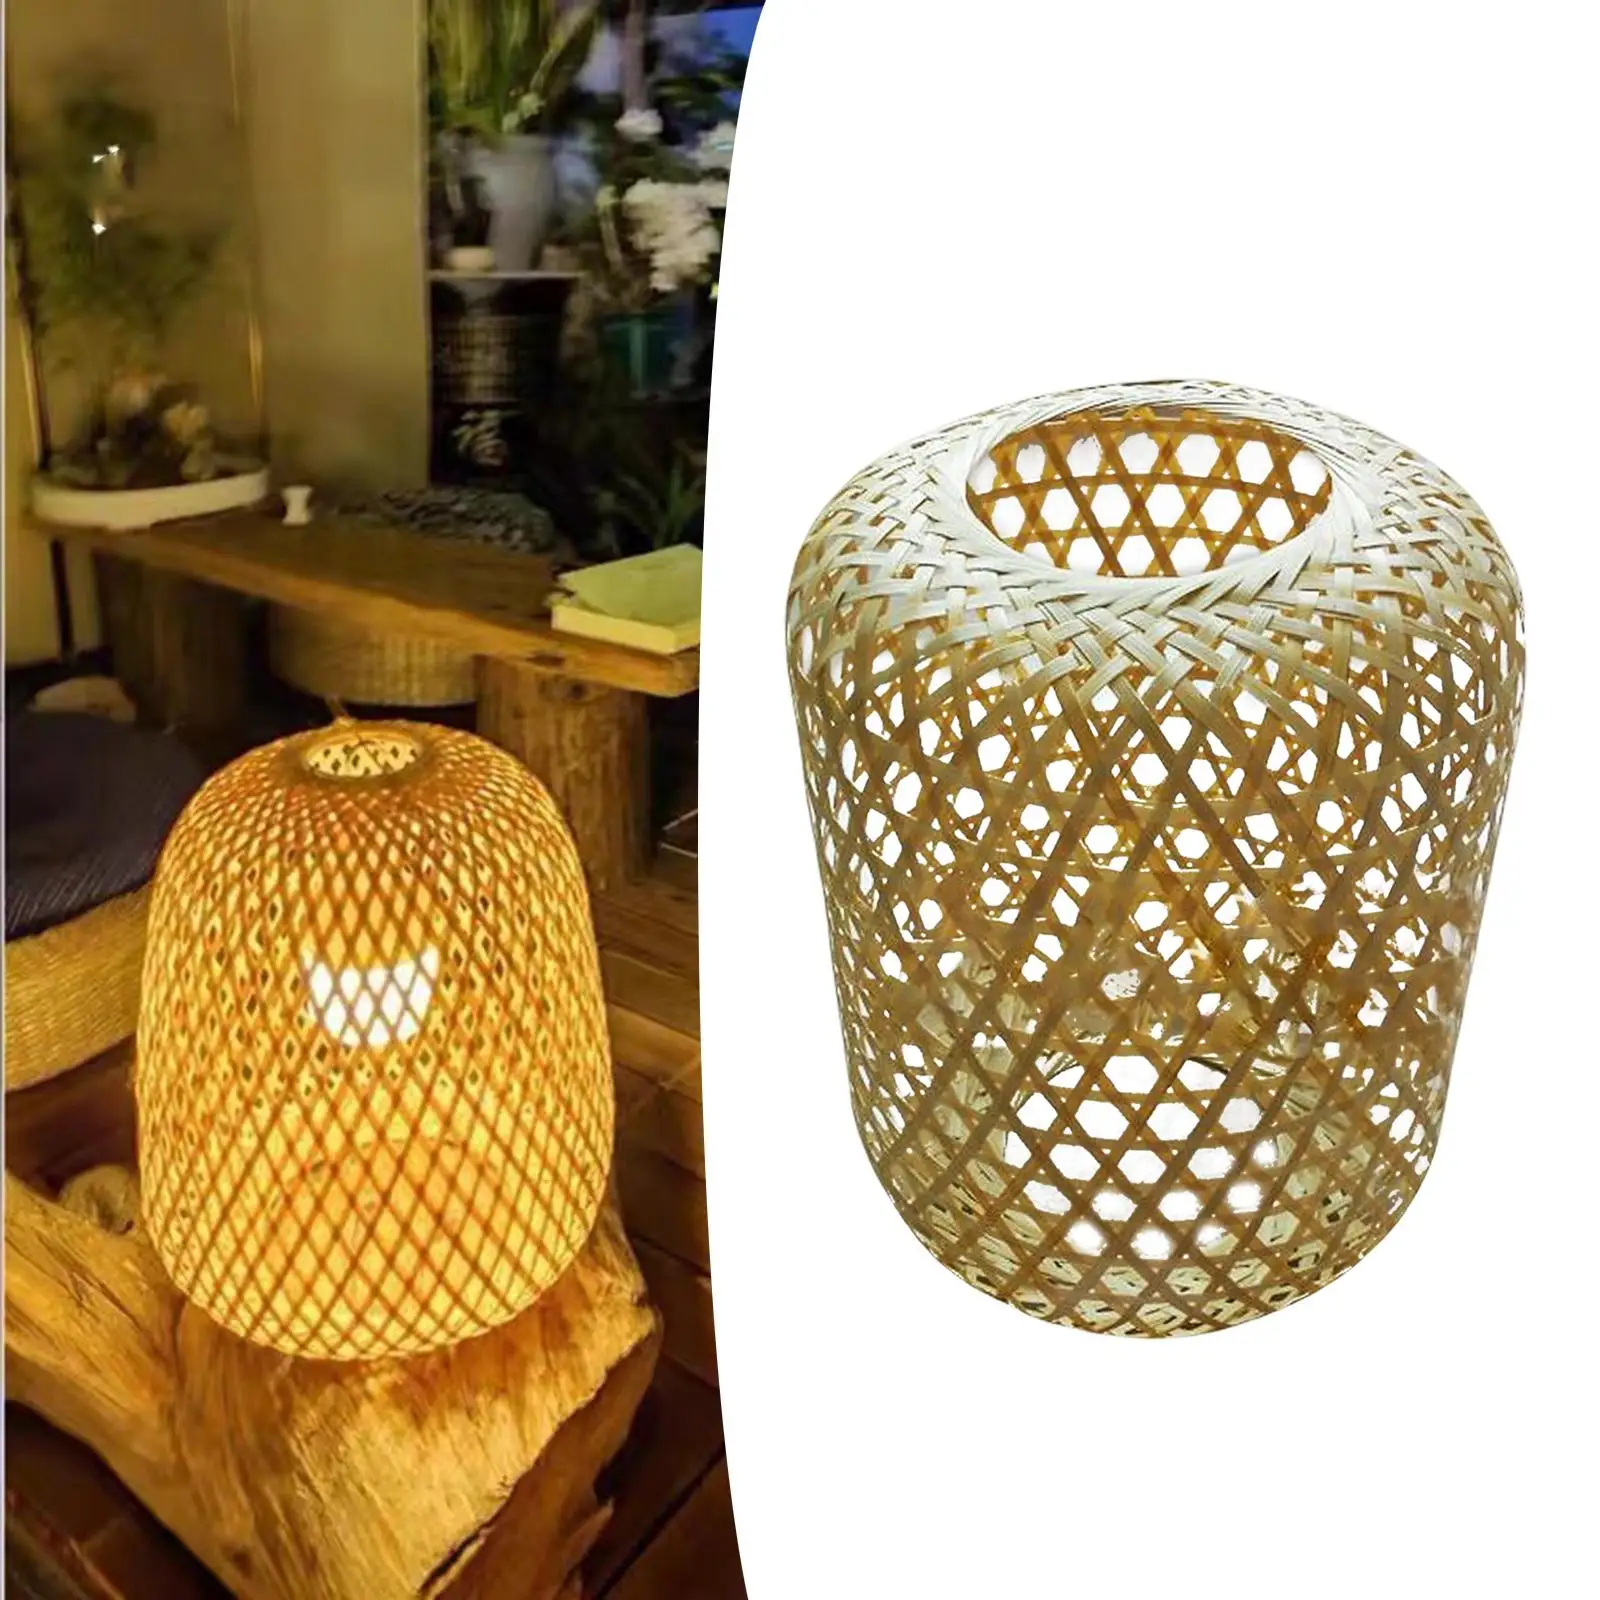 Classic Woven Bamboo Lamp Shade Ceiling Light Fixture Pendant Light Lampshade Droplight Fitting for Nursery Living Room Home